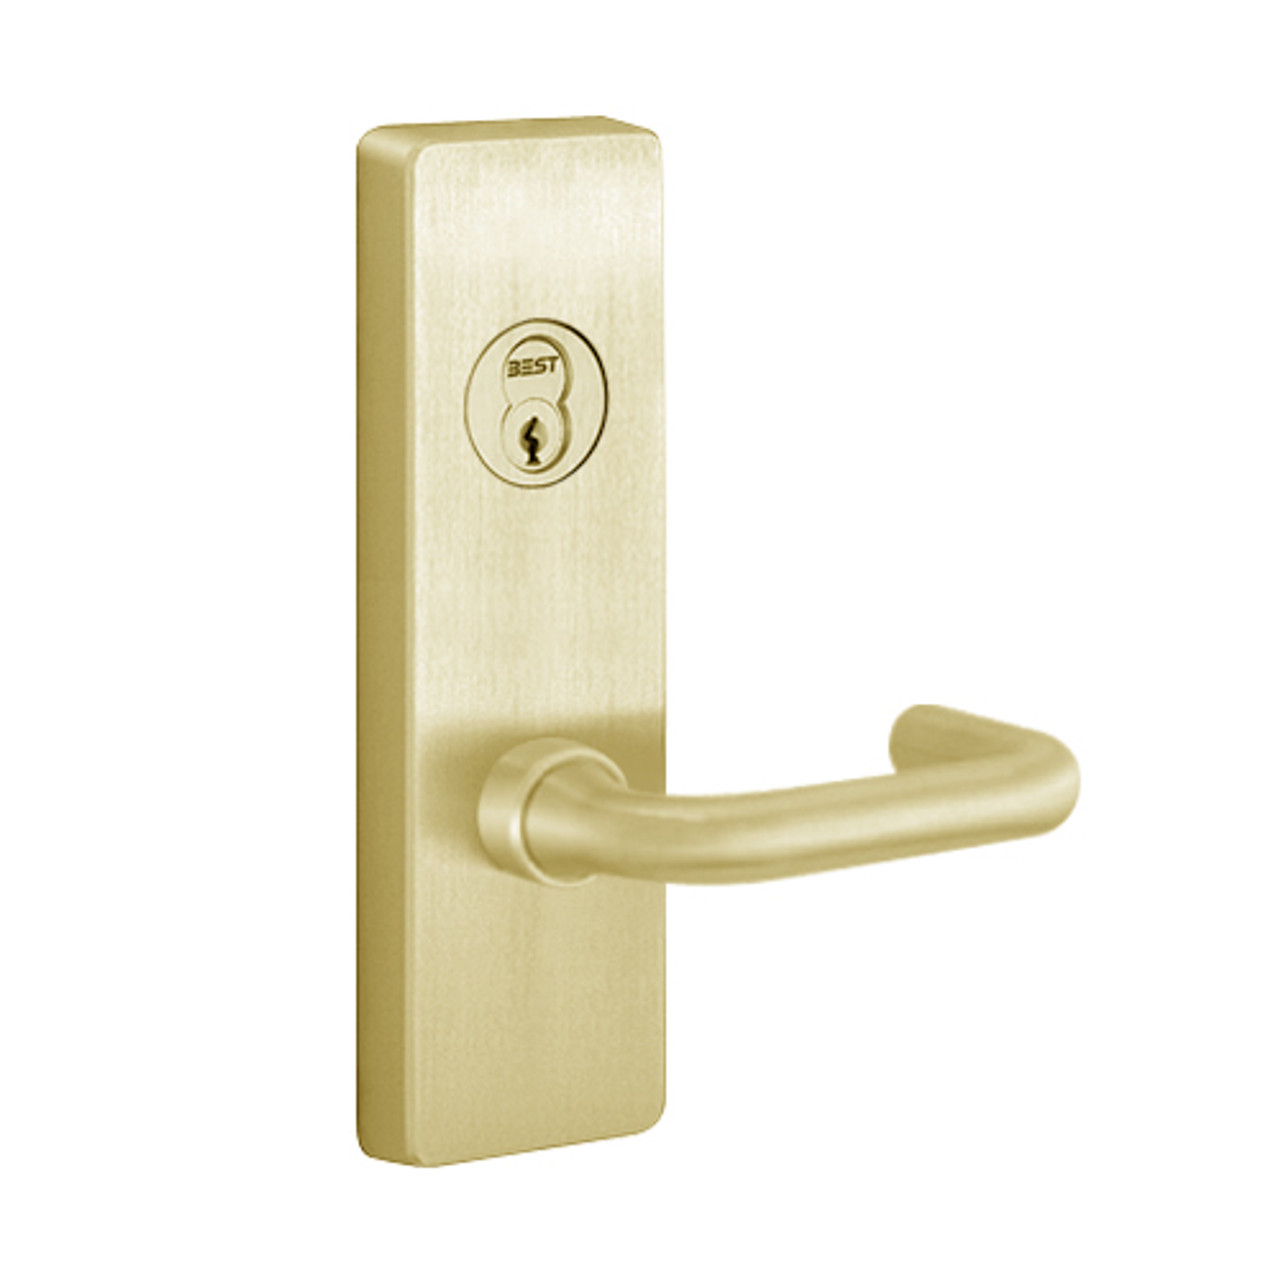 RM4903C-605-LHR PHI Key Retracts Latchbolt Retrofit Trim with C Lever Design for Apex and Olympian Series Exit Device in Bright Brass Finish